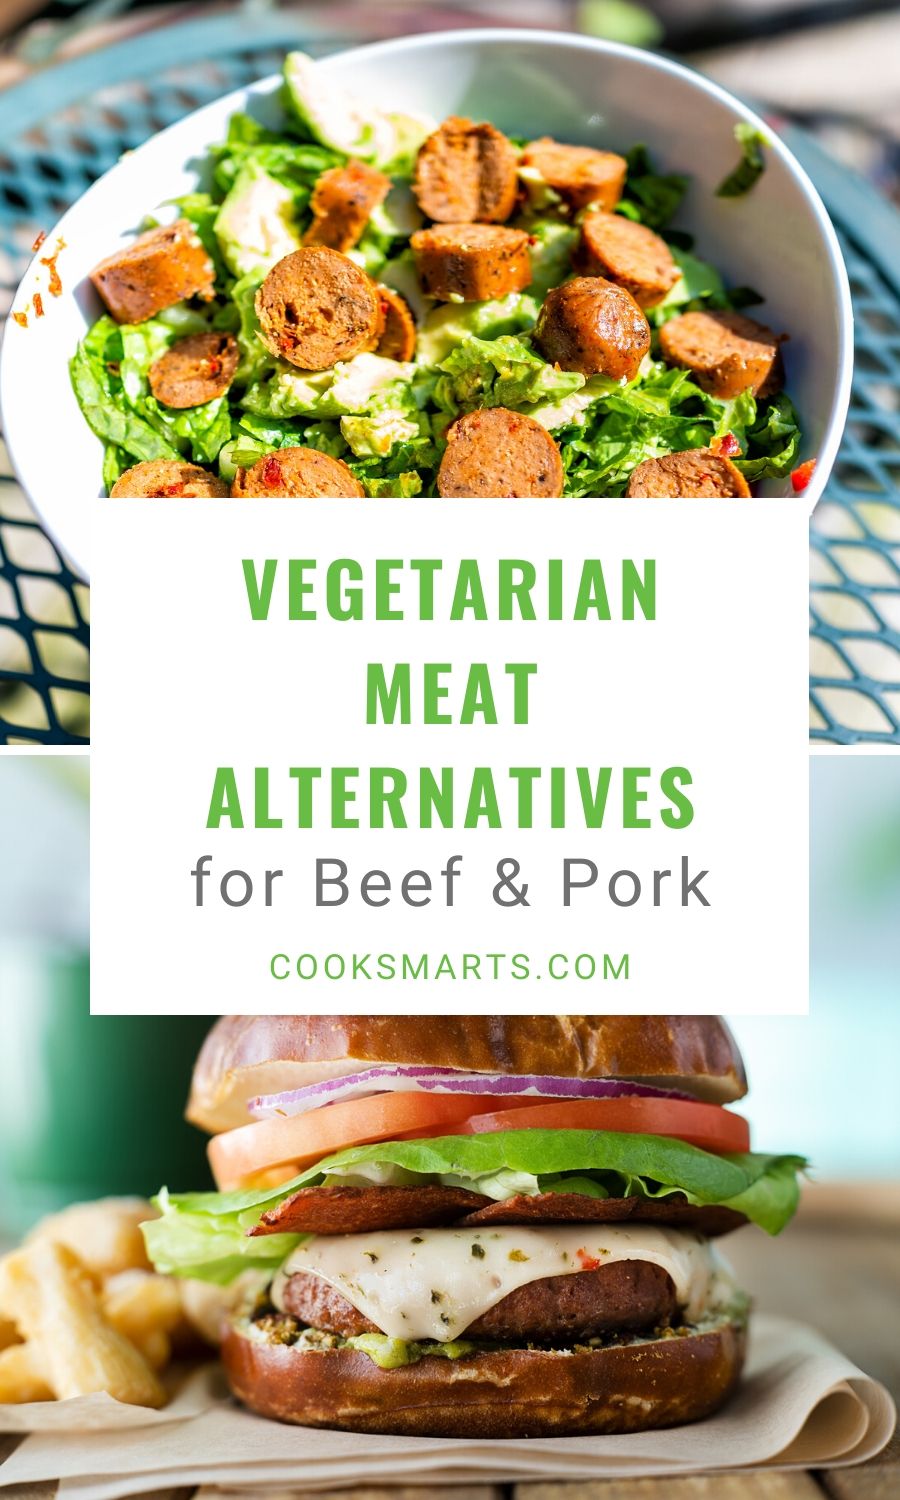 The Best Meat Substitute for Burgers, Sausages, and Ground Meat | Cook Smarts